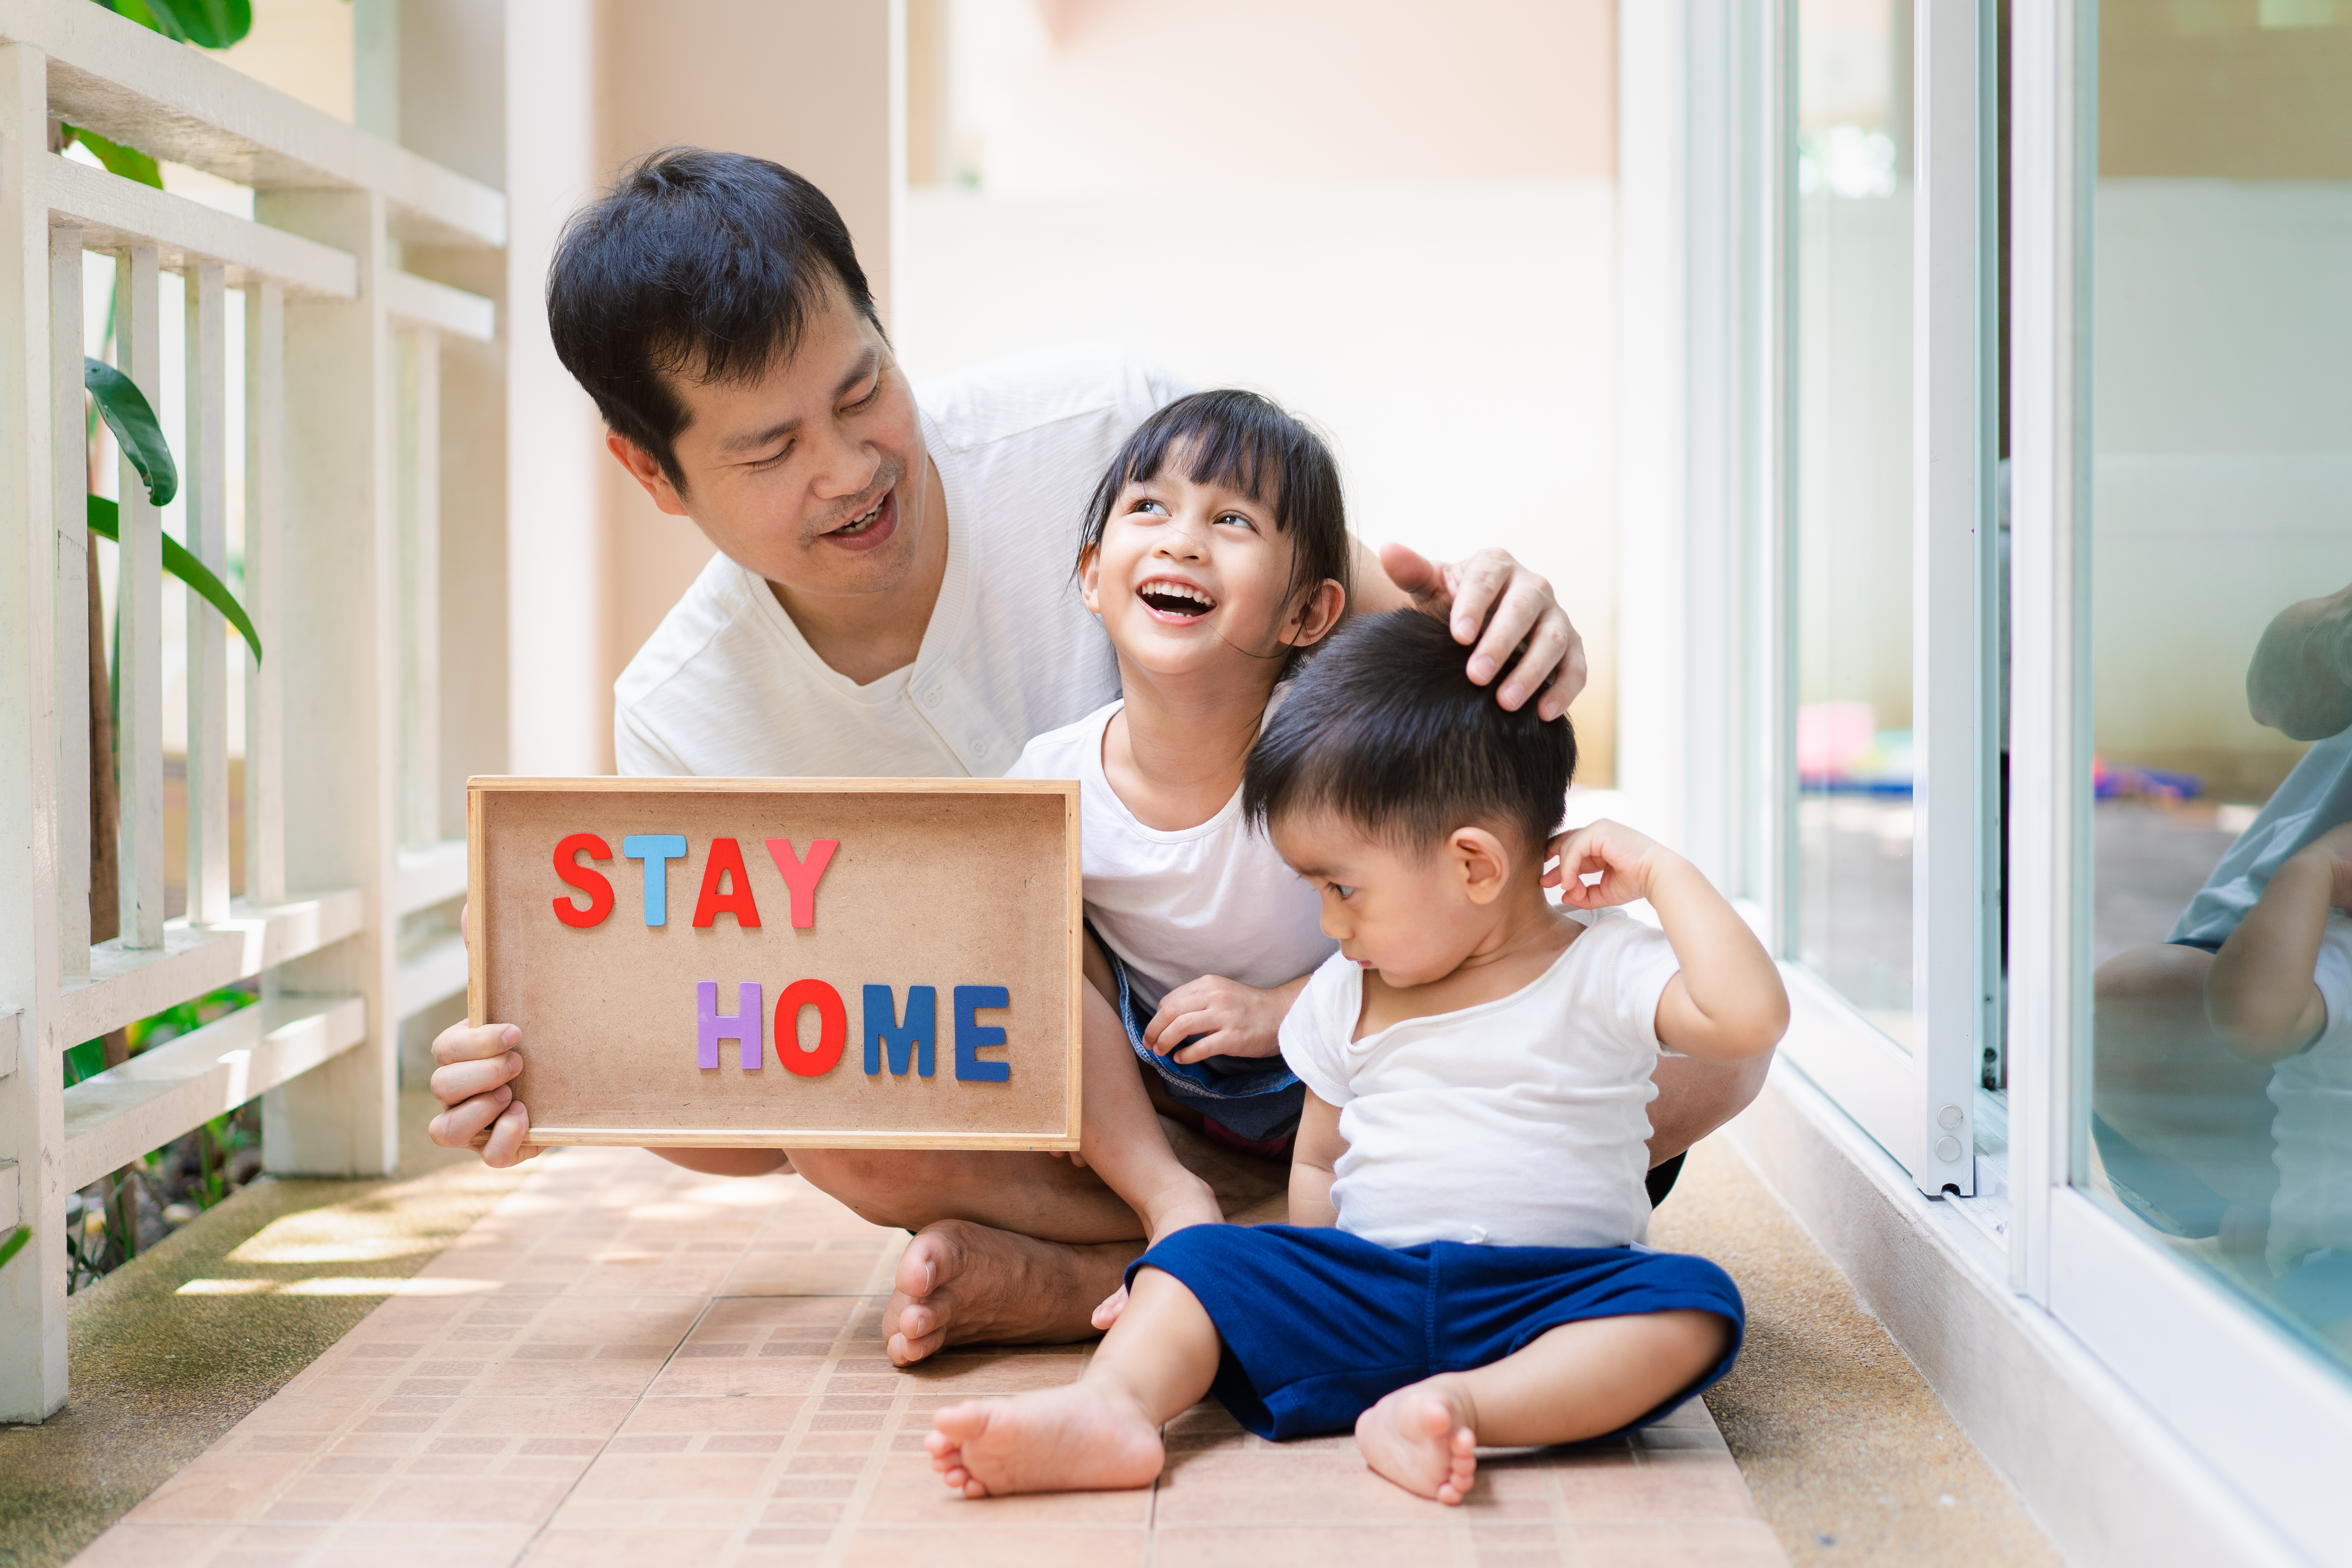 Father and children are holding the "stay home" board.jpg